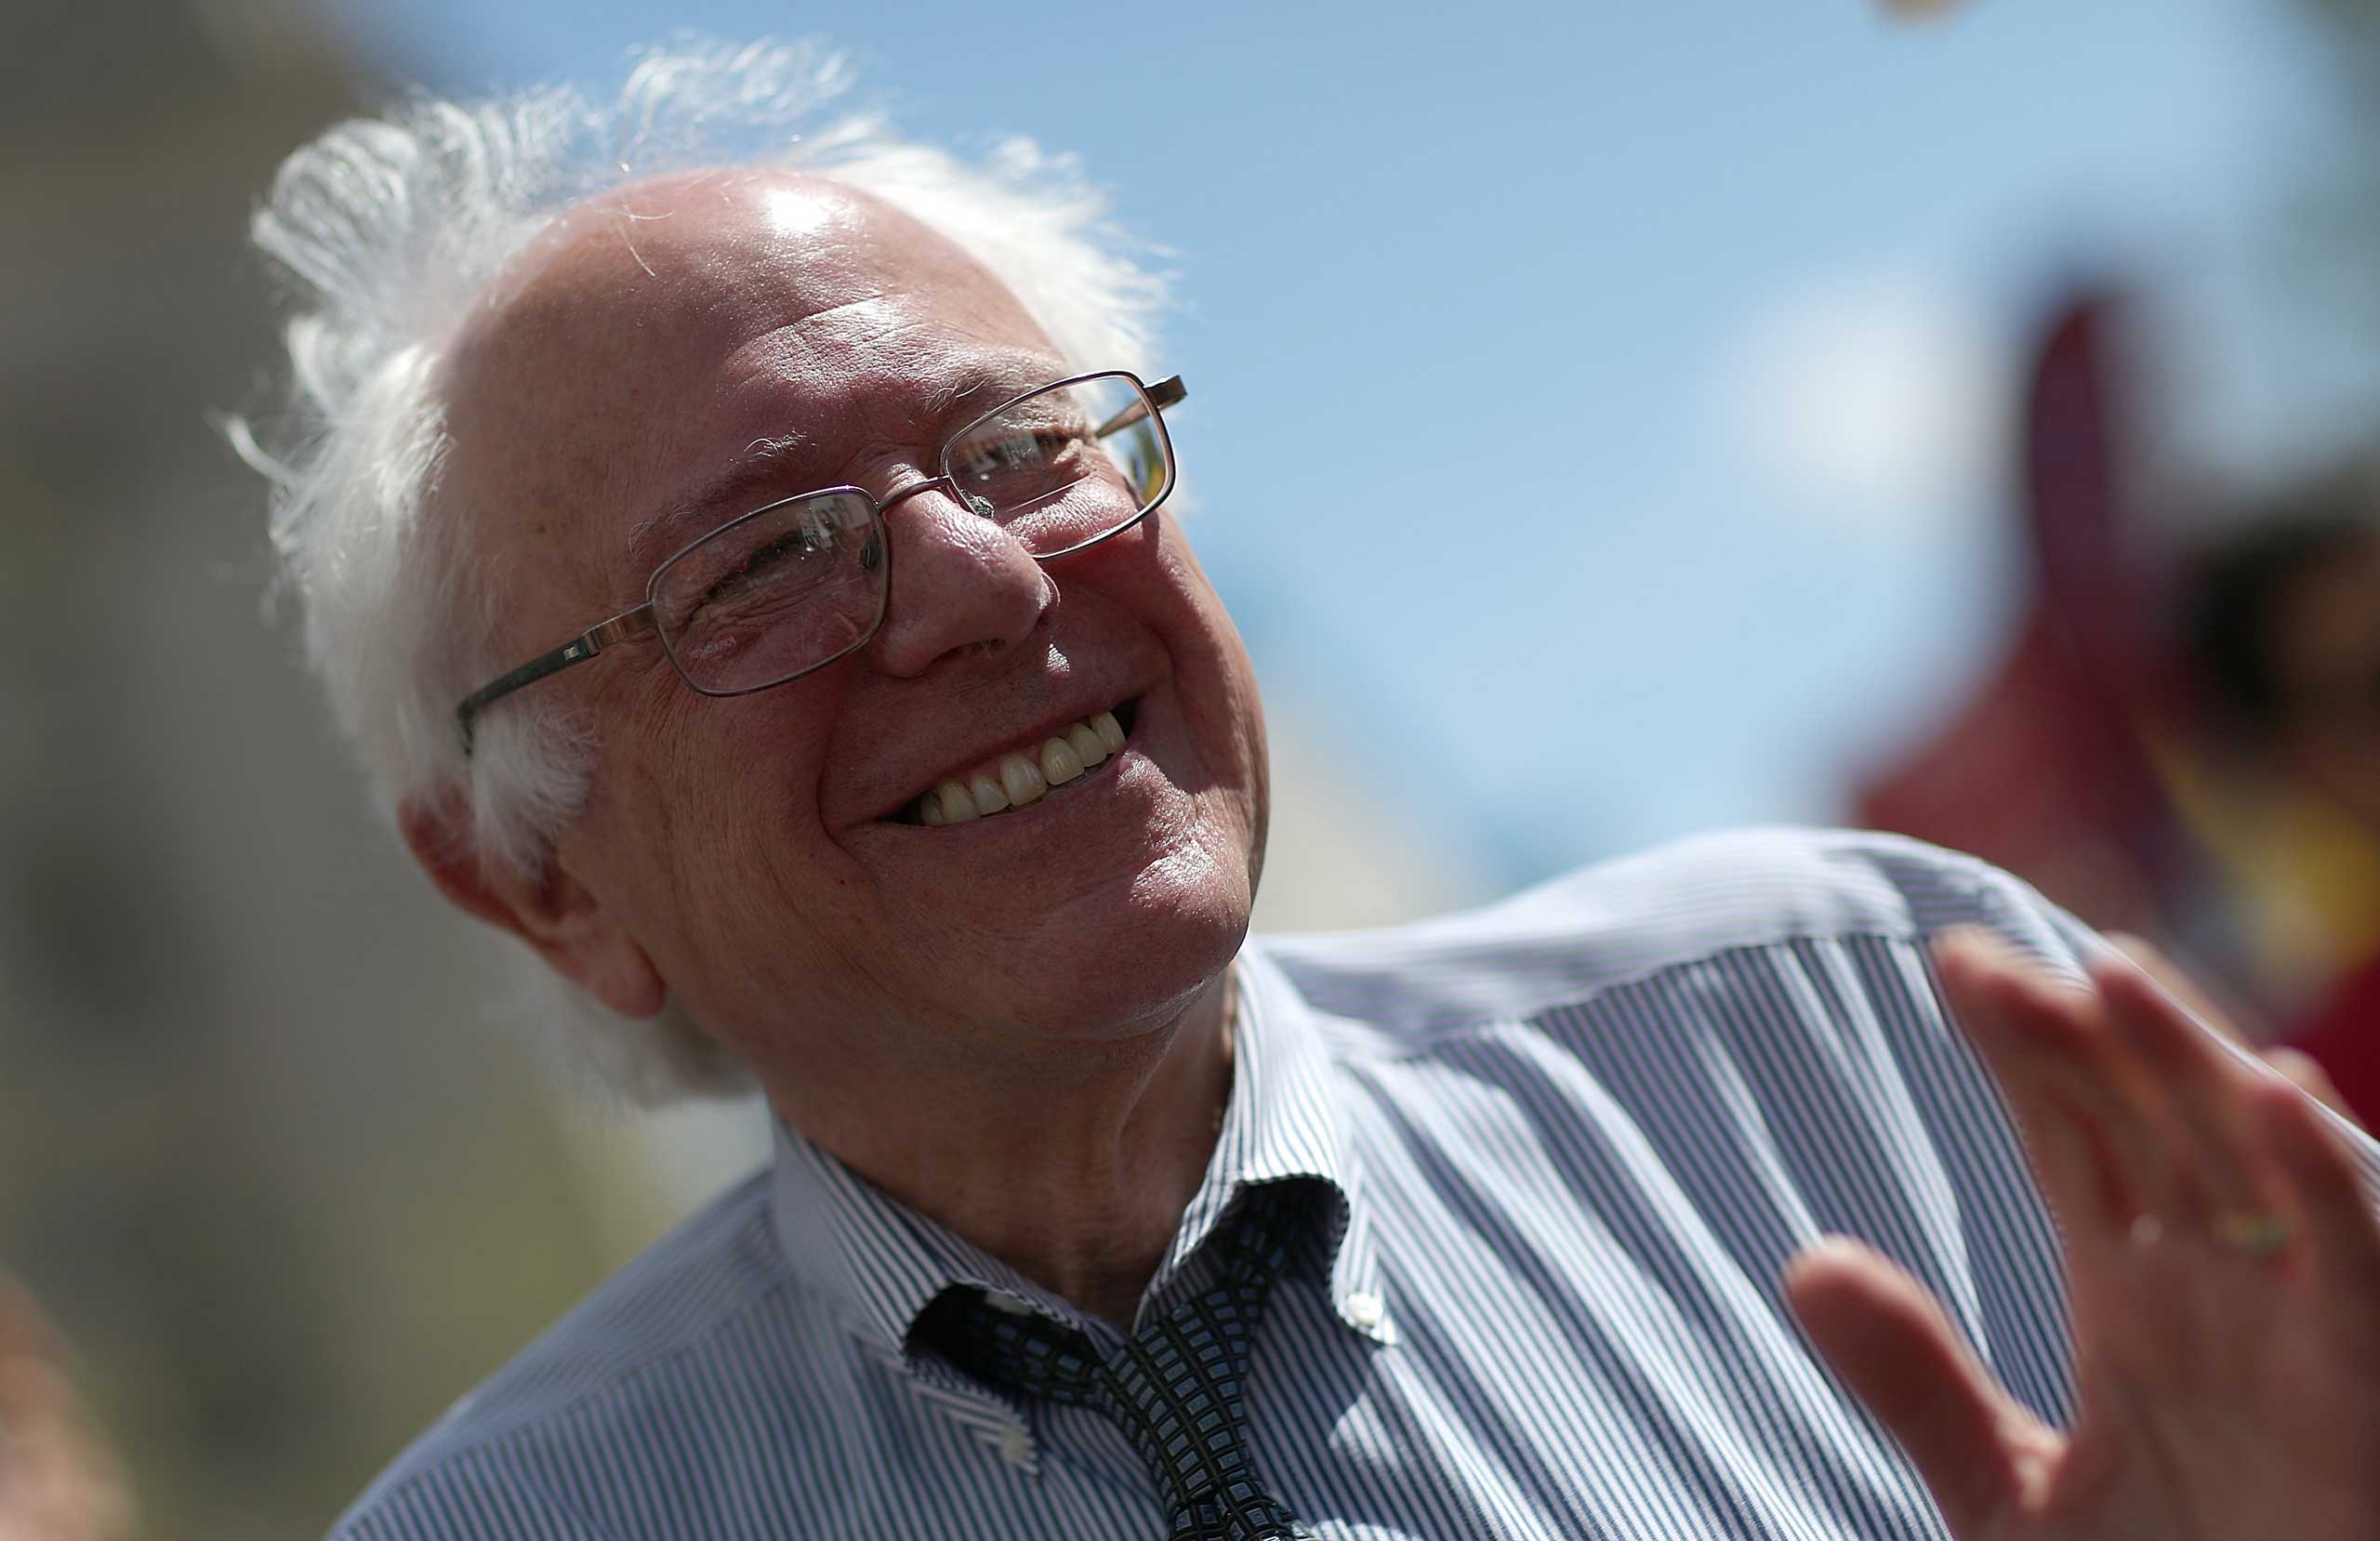 Sen. Bernie Sanders (I-VT) participates in a "Don't Trade Our Future" march organized by the group Campaign for America's Future in Washington on April 20, 2015. (Win McNamee—Getty Images)